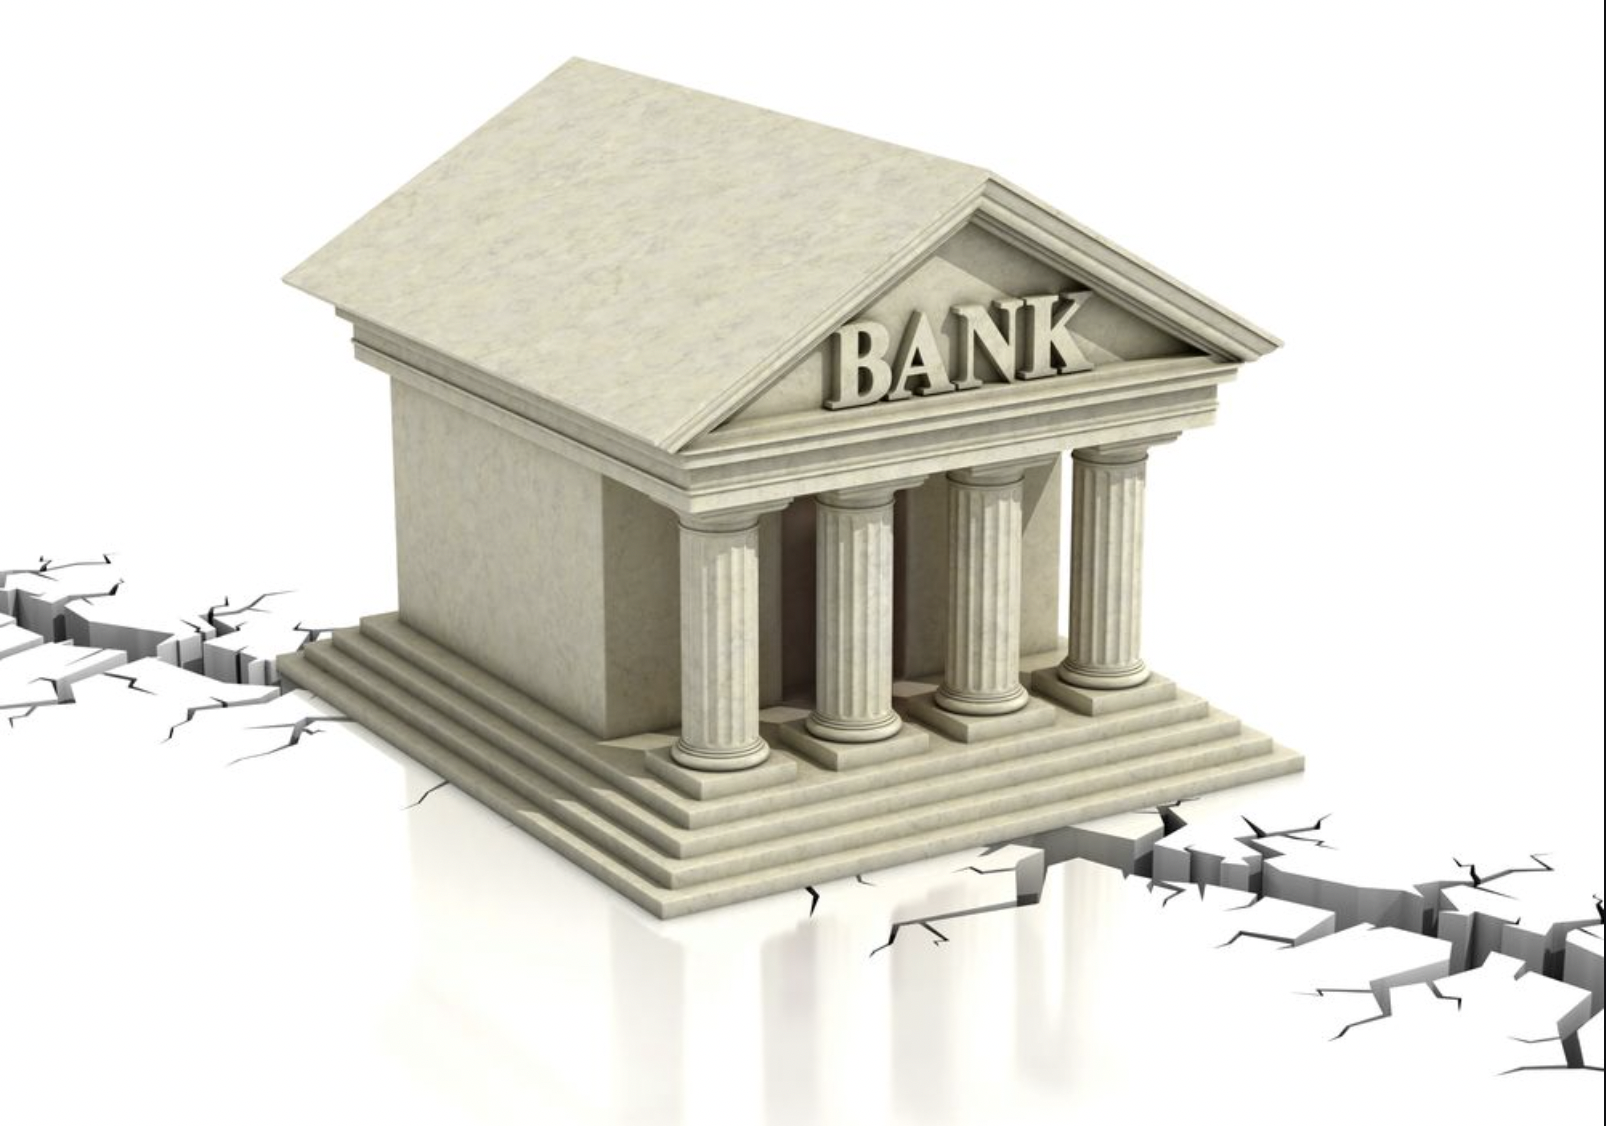 OSFI reassures Canadians about the banking system